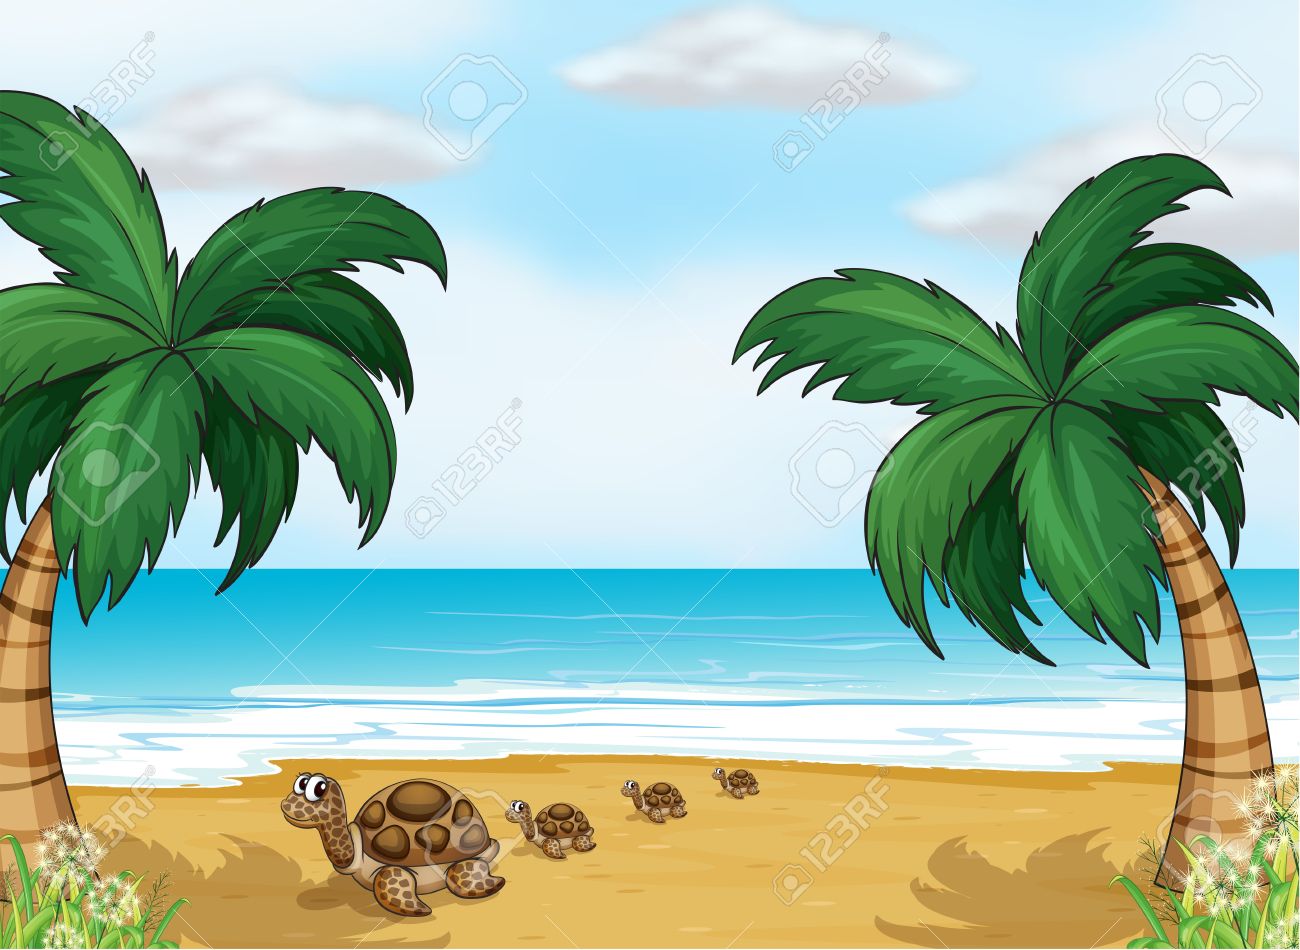 Free Tropical Clipart sea turtle, Download Free Clip Art on